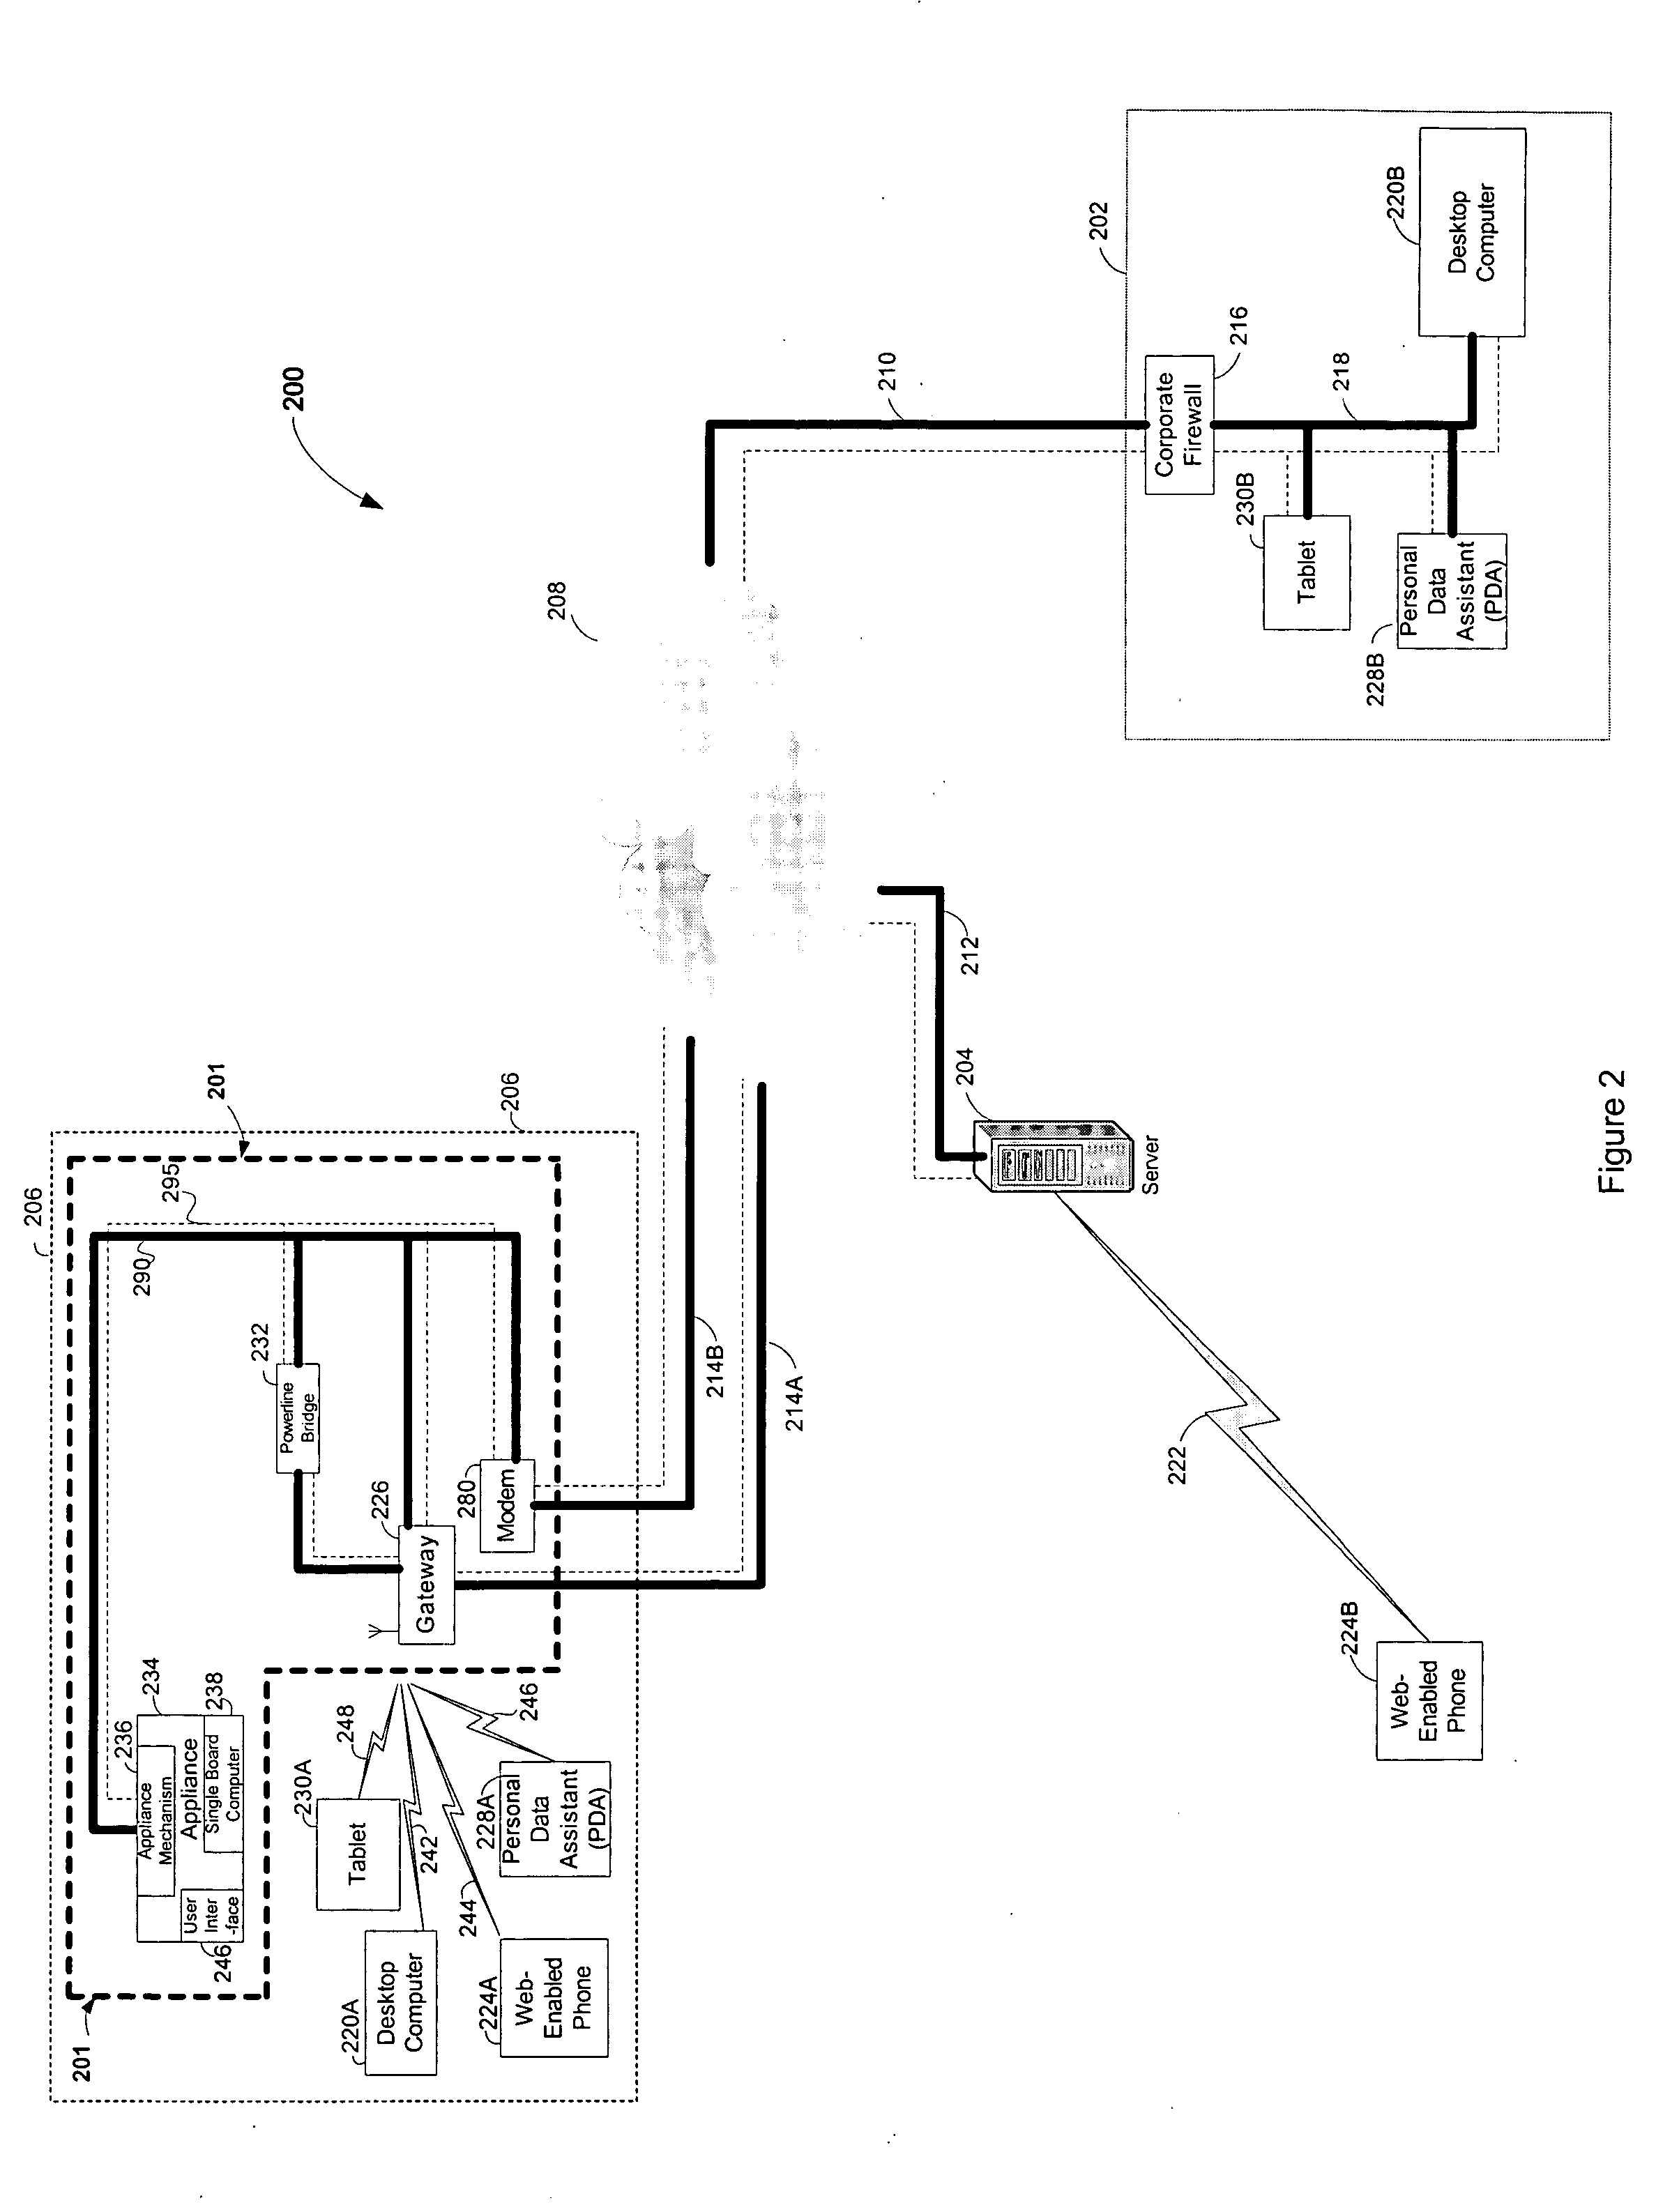 Appliance communication system and method